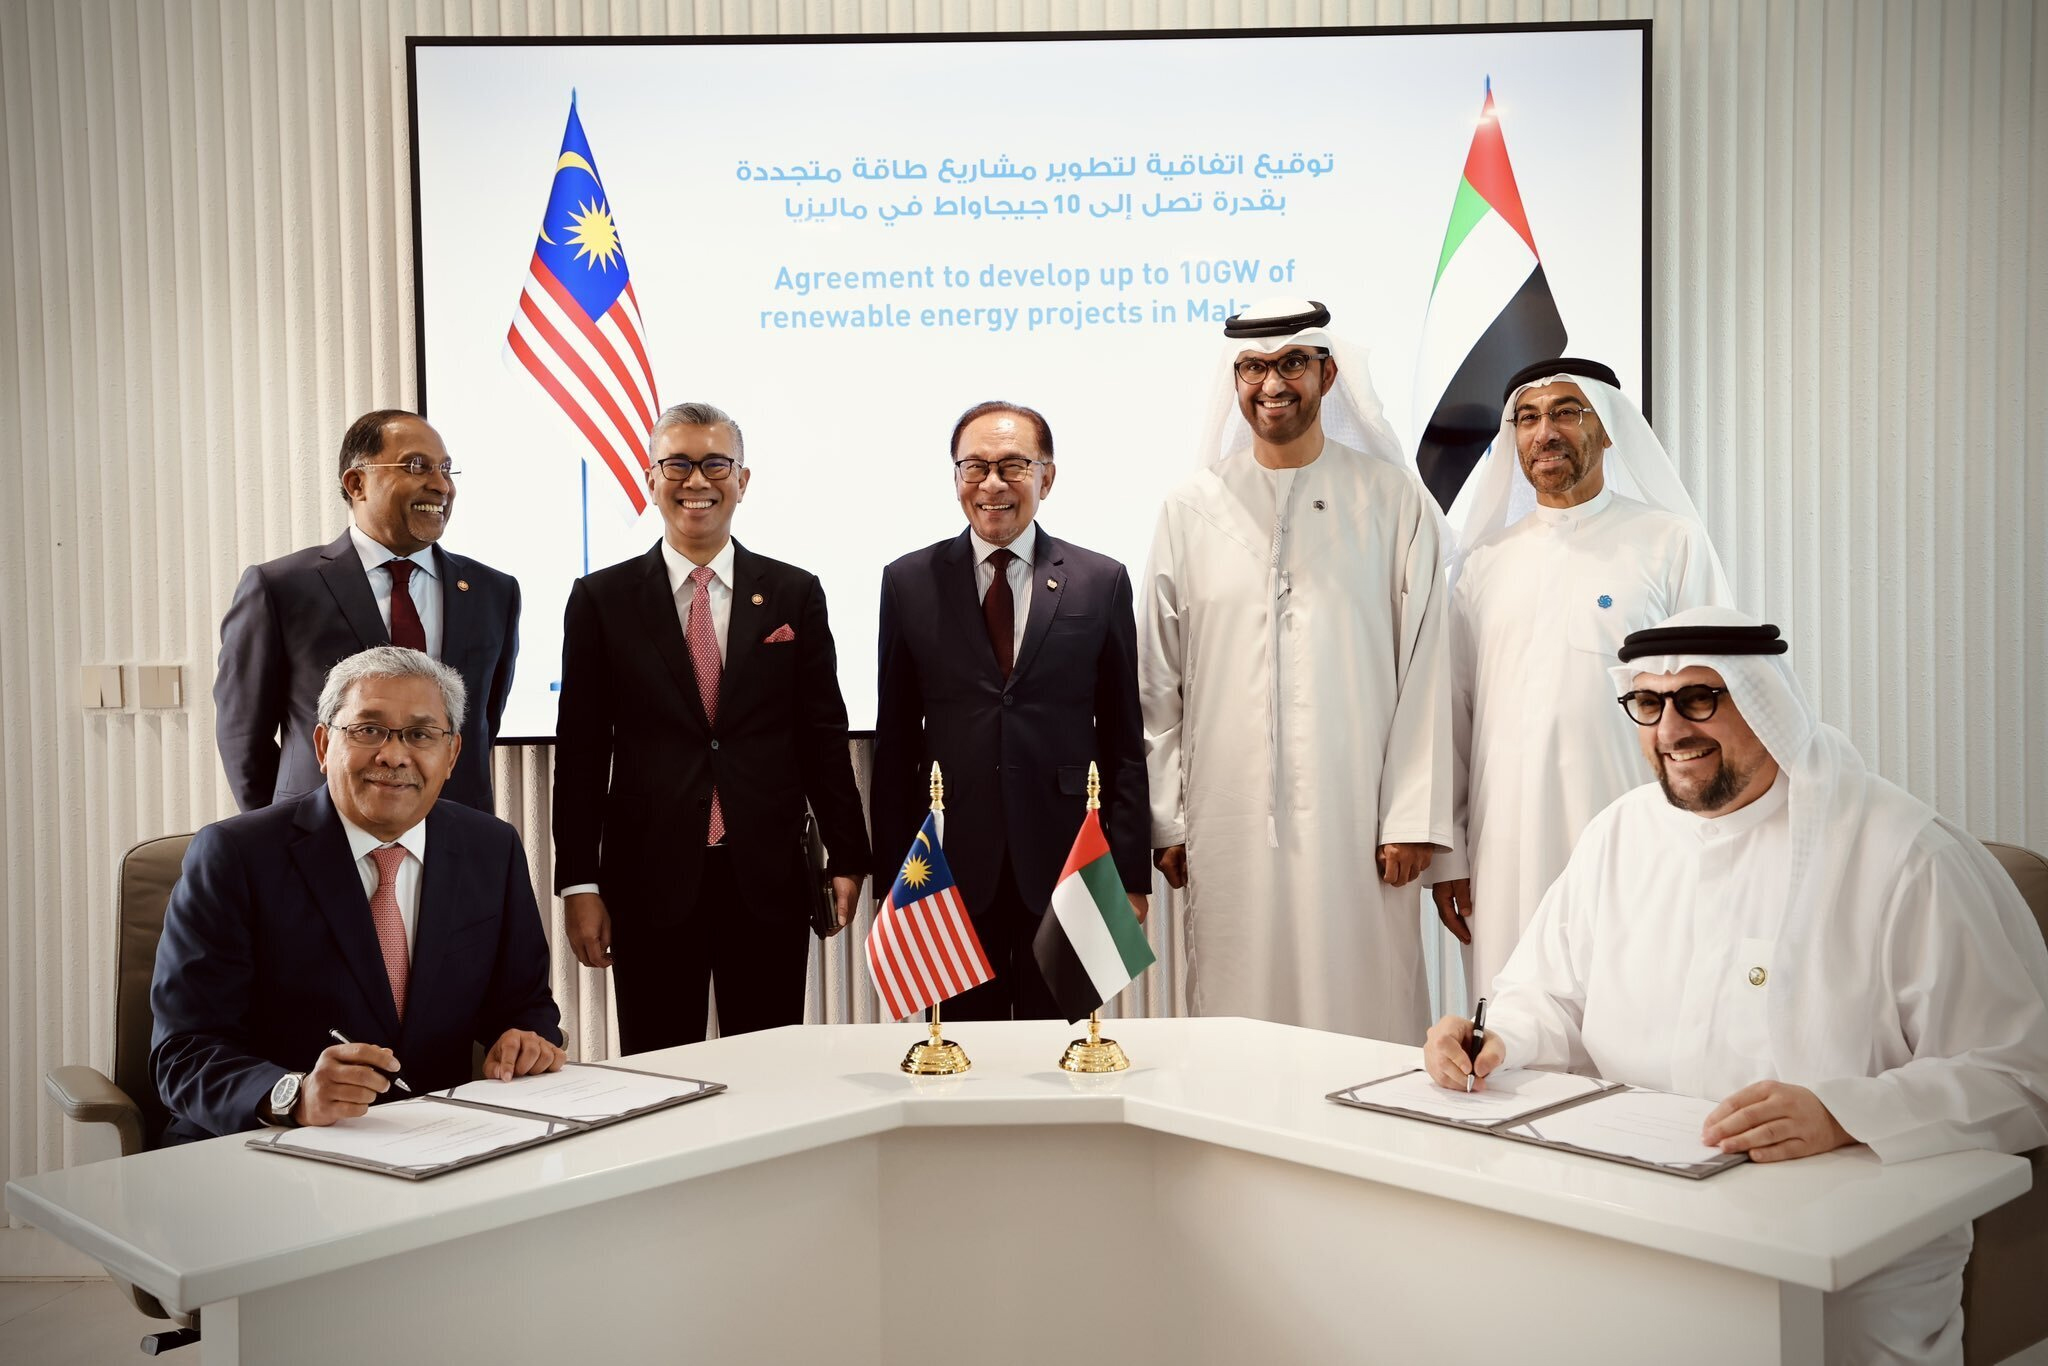 Image for Masdar signs MoU With Malaysia To Develop Up To 10GW Of Renewable Energy Projects